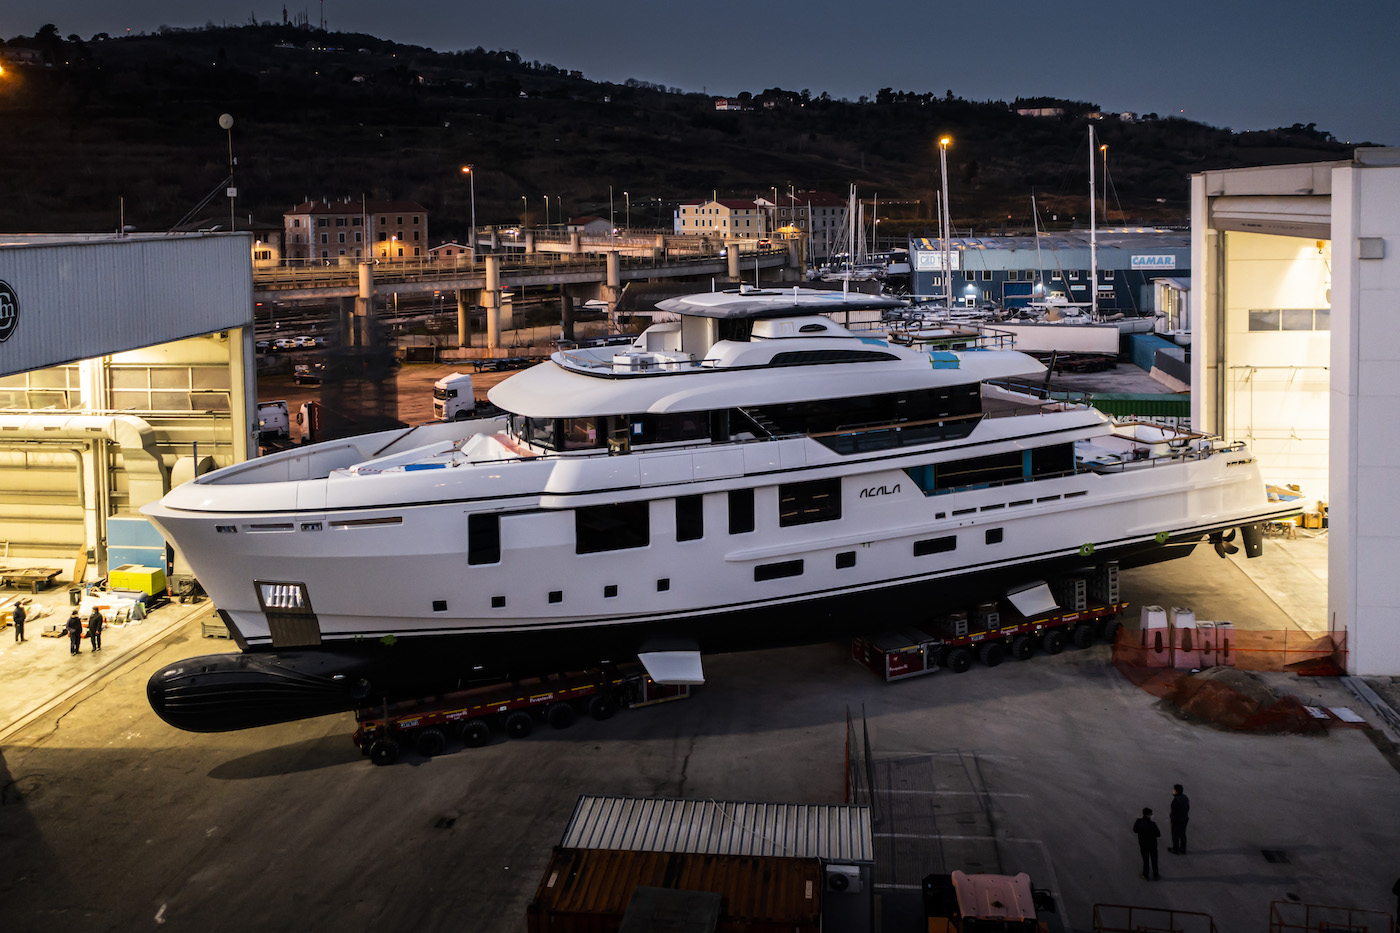 43m ACALA yacht ready for launch